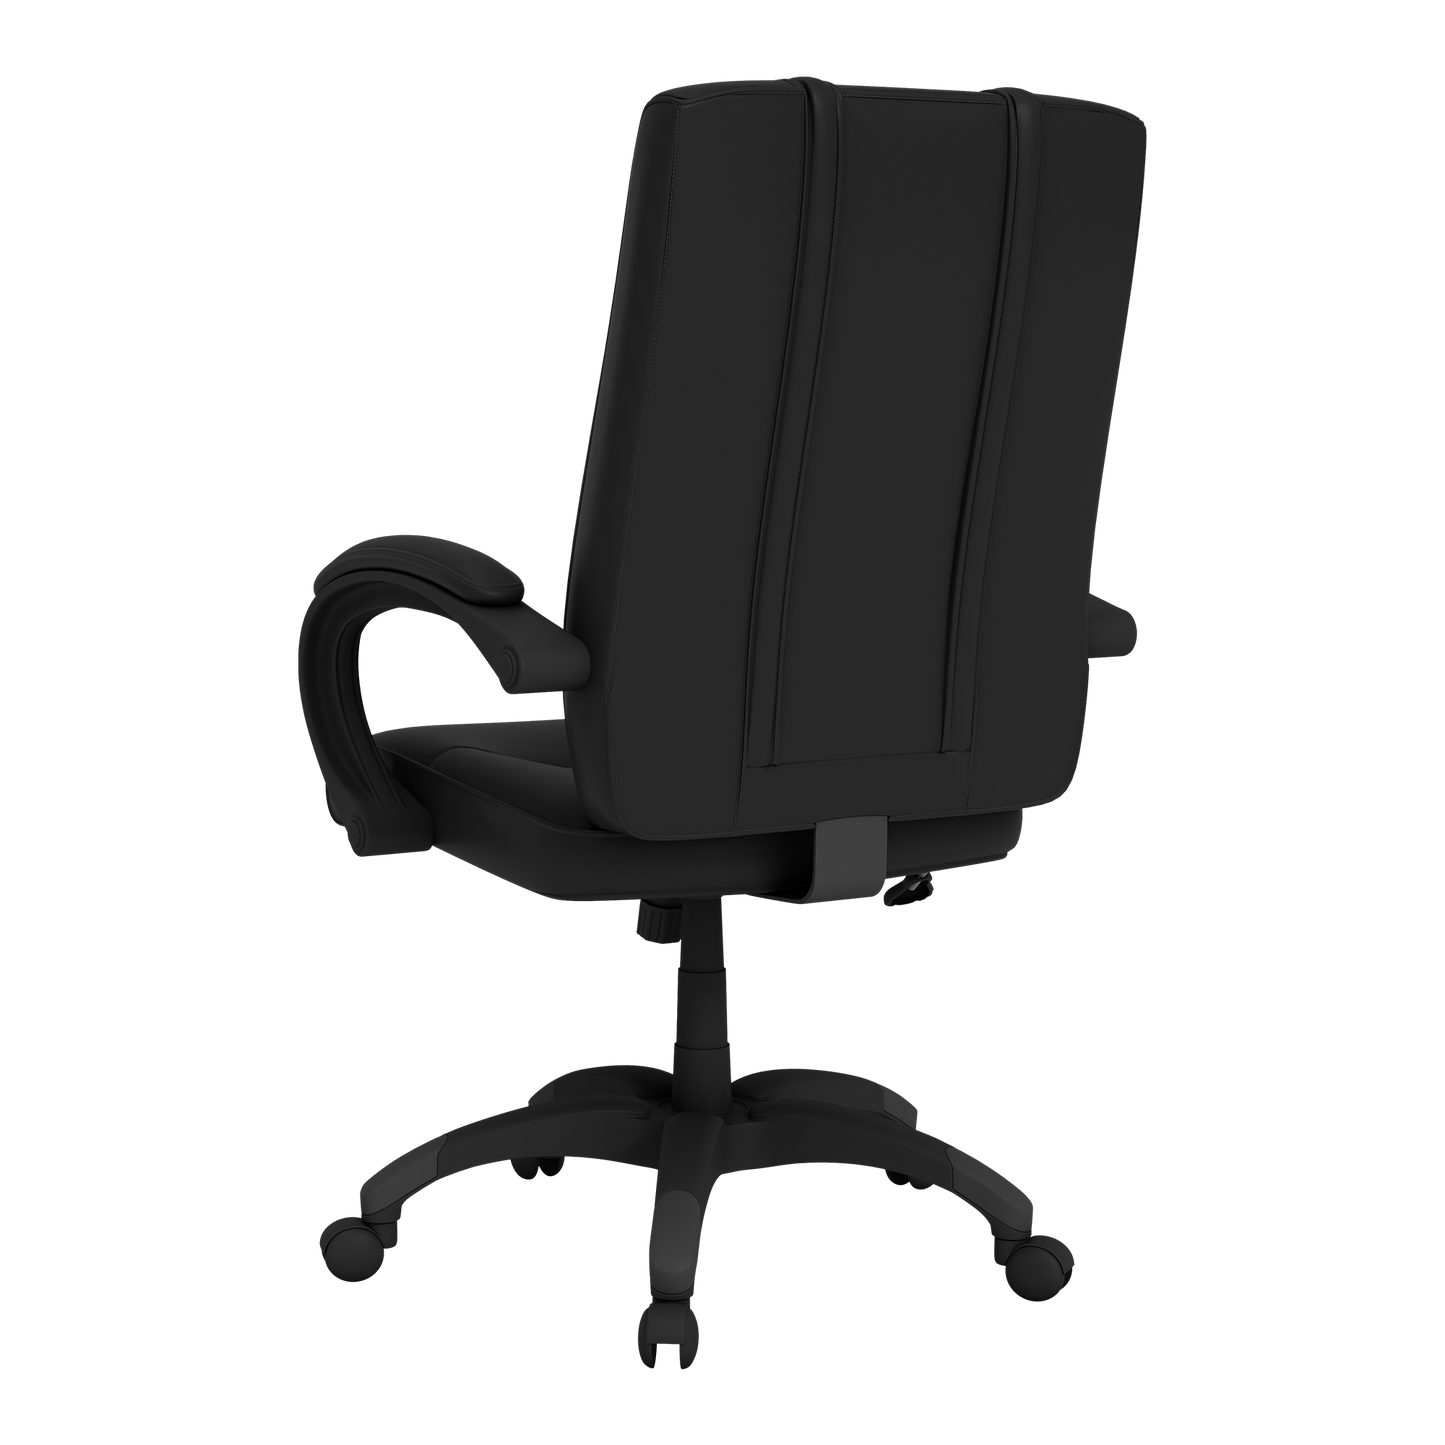 Office Chair 1000 with Kansas City Royals Wordmark Logo Panel